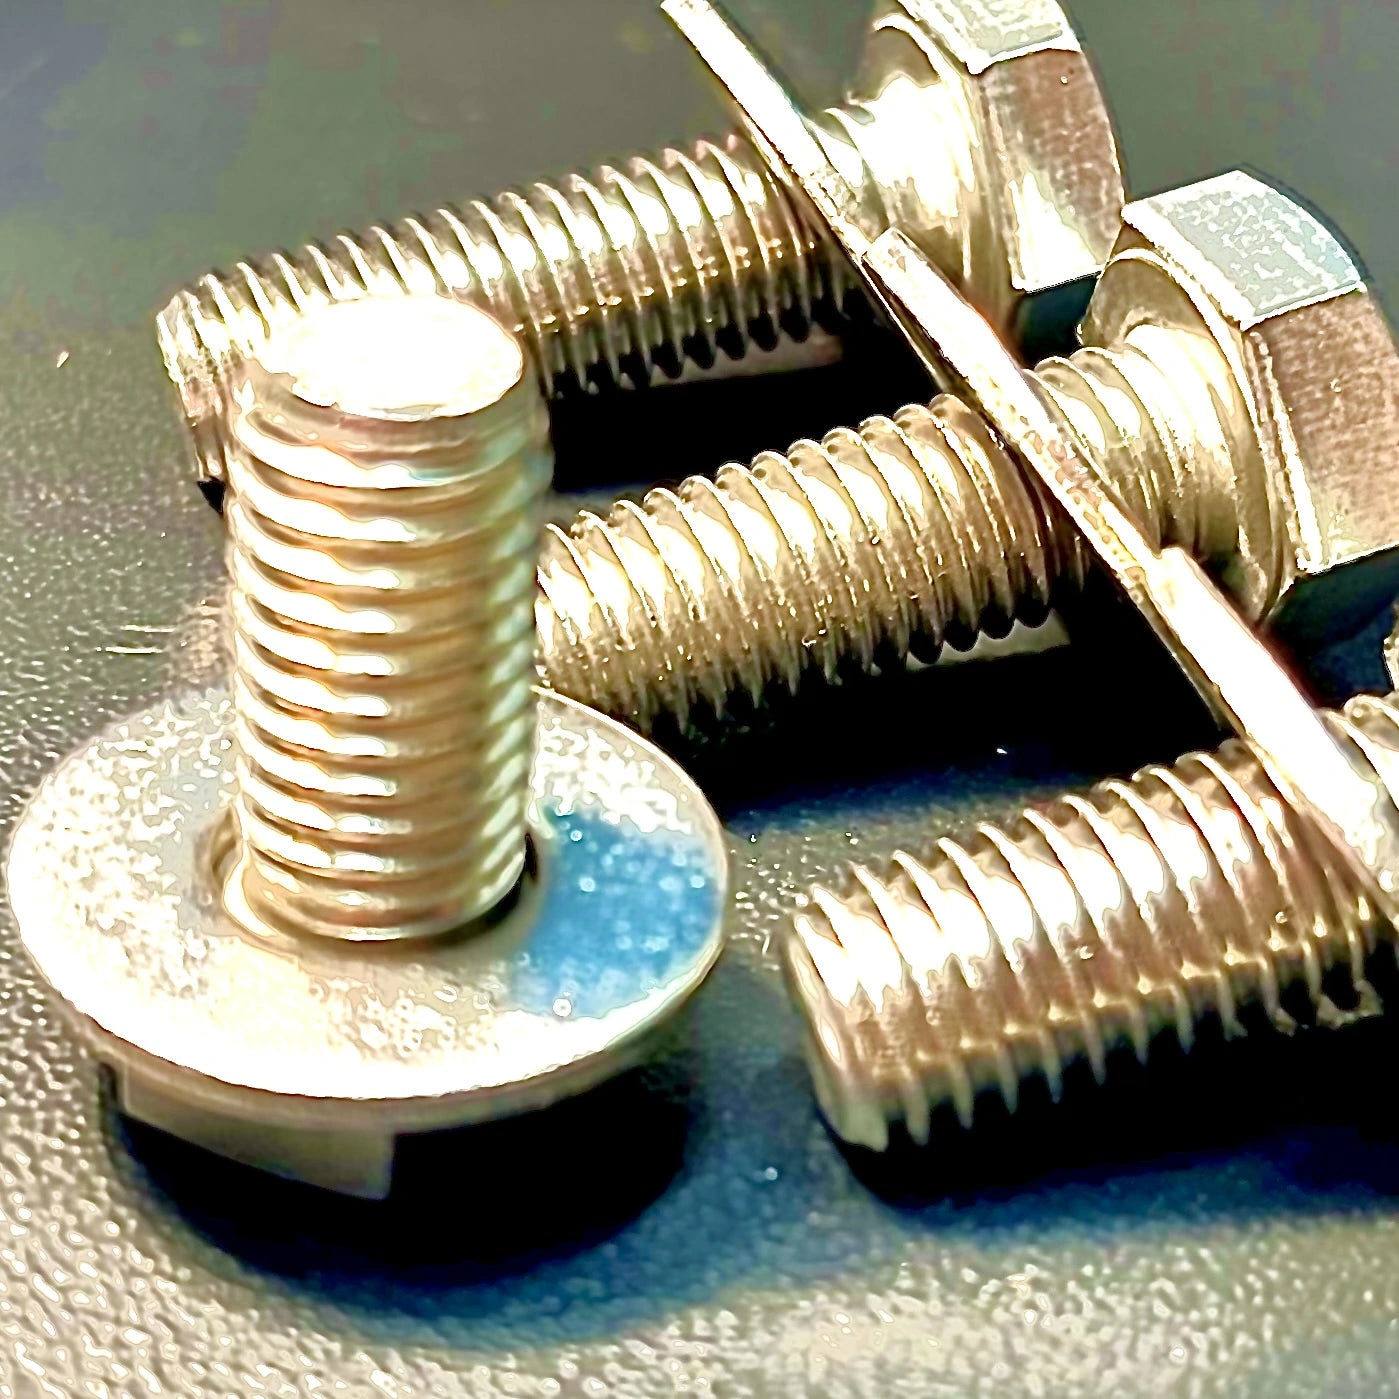 M8 x Over 55mm Hex Set Screw Plus Washer A2 304 Stainless - Fixaball Ltd. Fixings and Fasteners UK